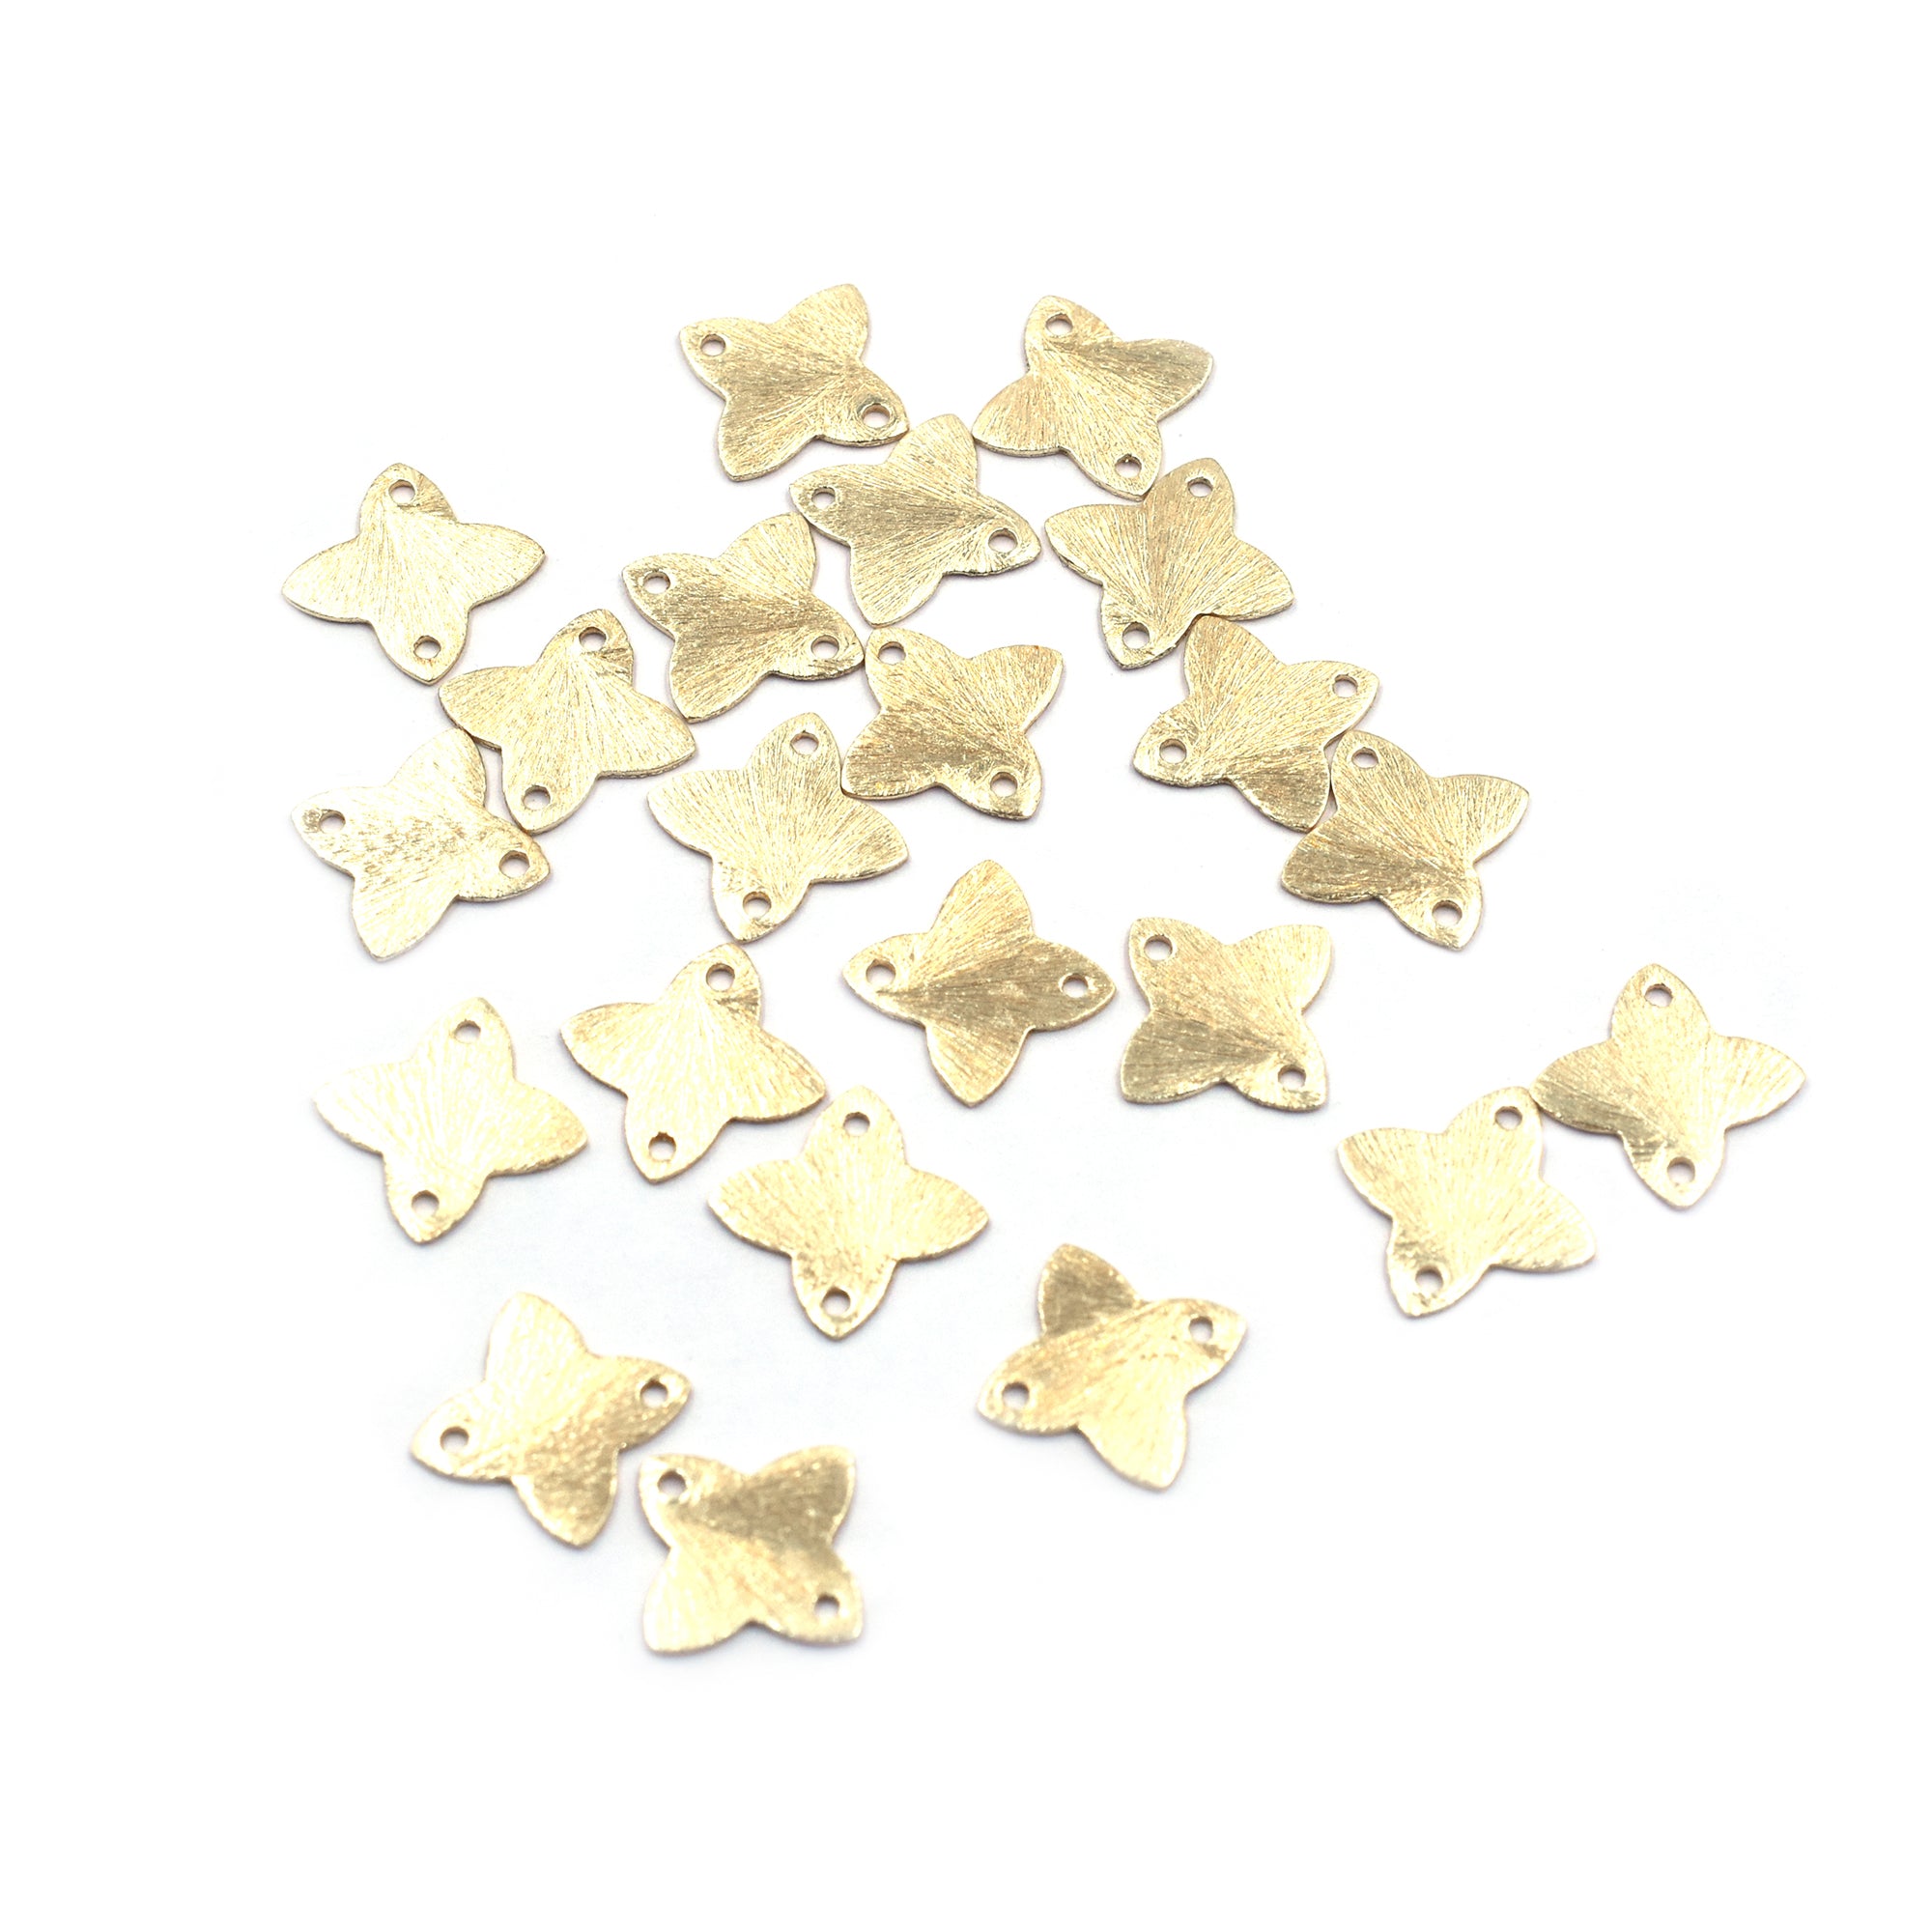 100 Pcs 12mm Clover Brushed Matte Finish Beads Gold Plated Copper